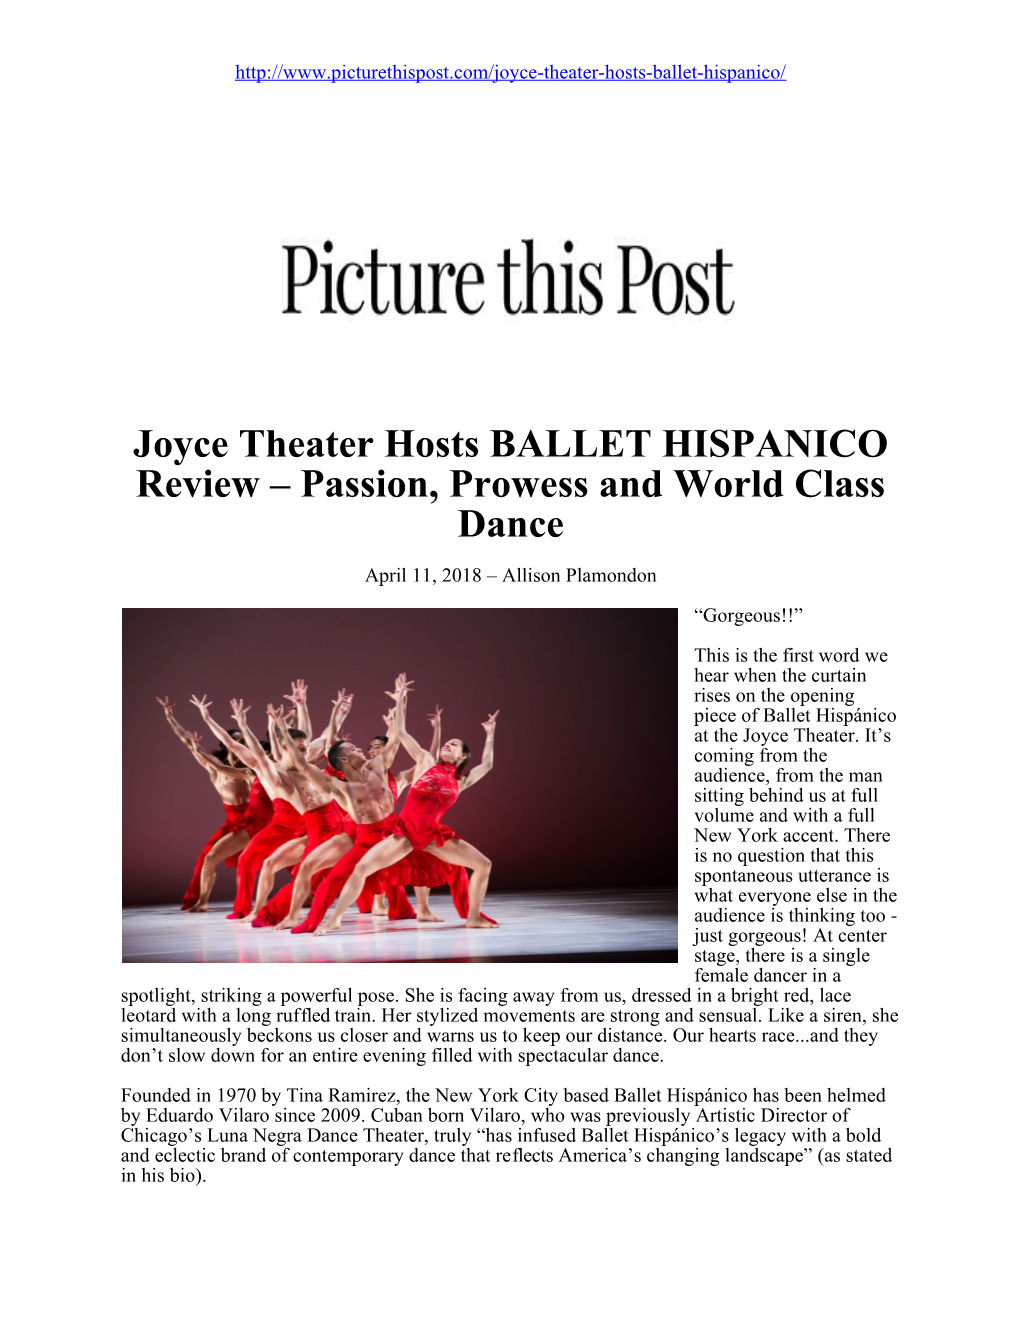 Joyce Theater Hosts BALLET HISPANICO Review – Passion, Prowess and World Class Dance